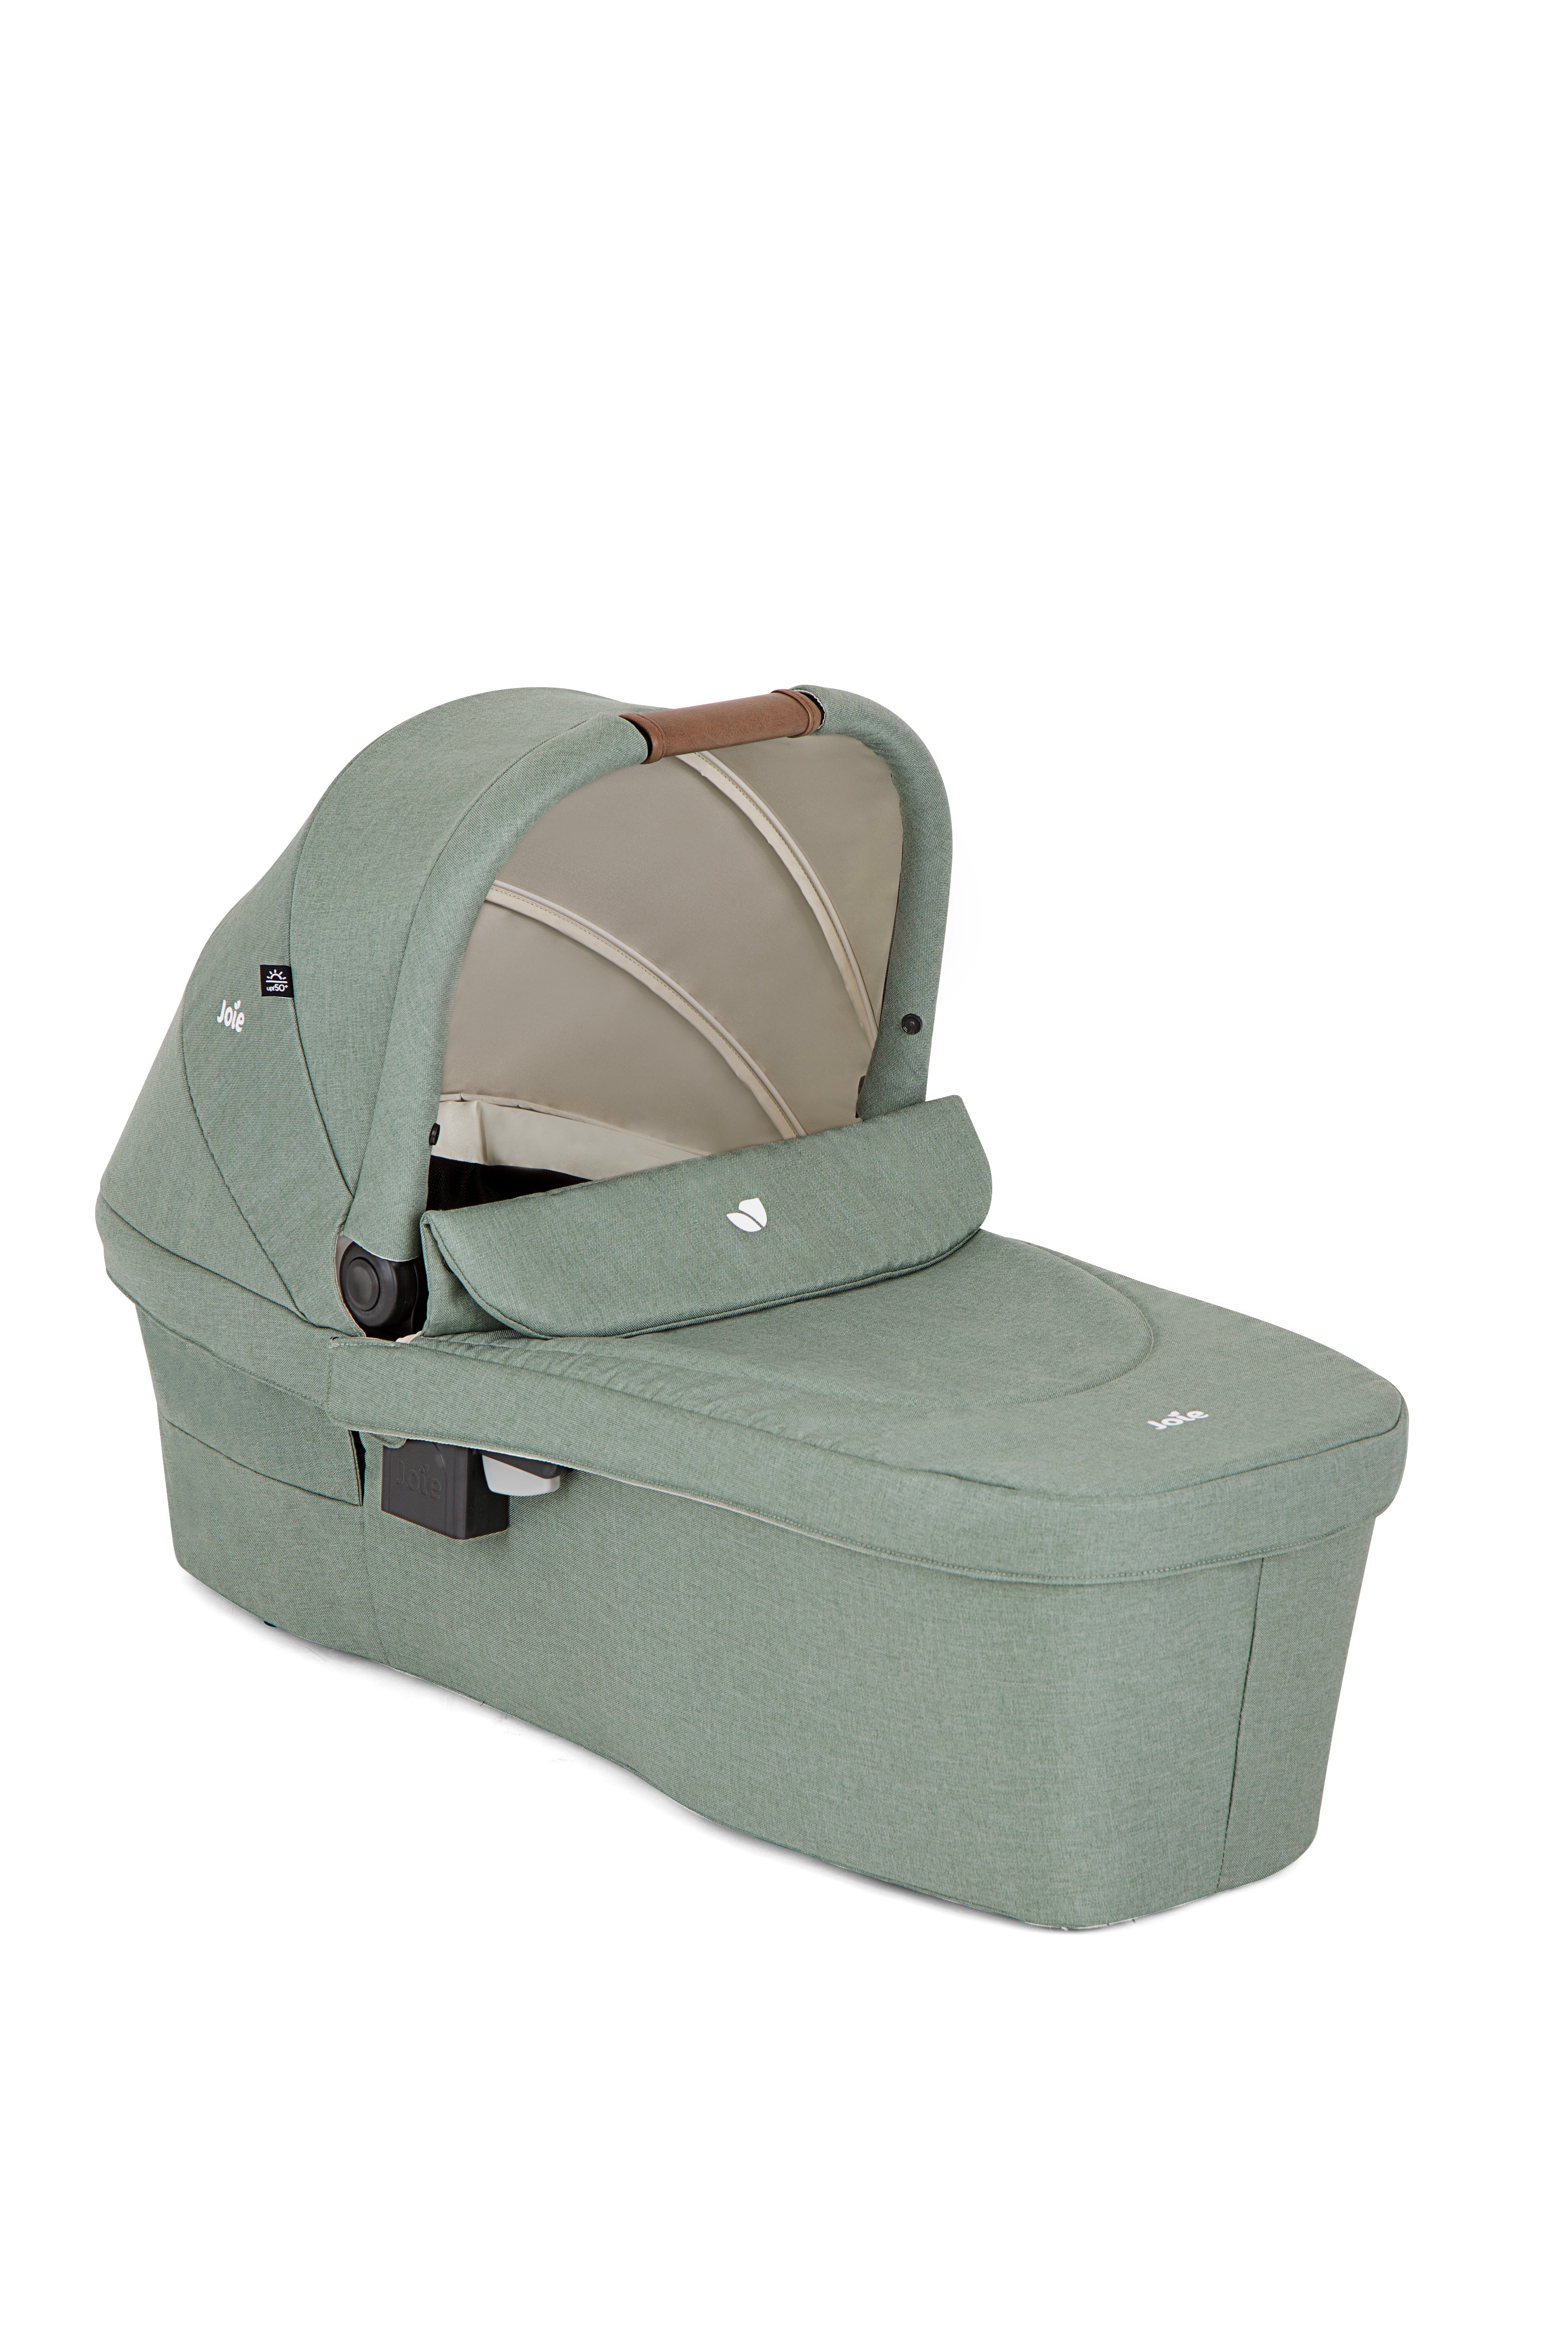 JOIE Carry Cot RAMBLE XL Laurel Birth to 9 kg